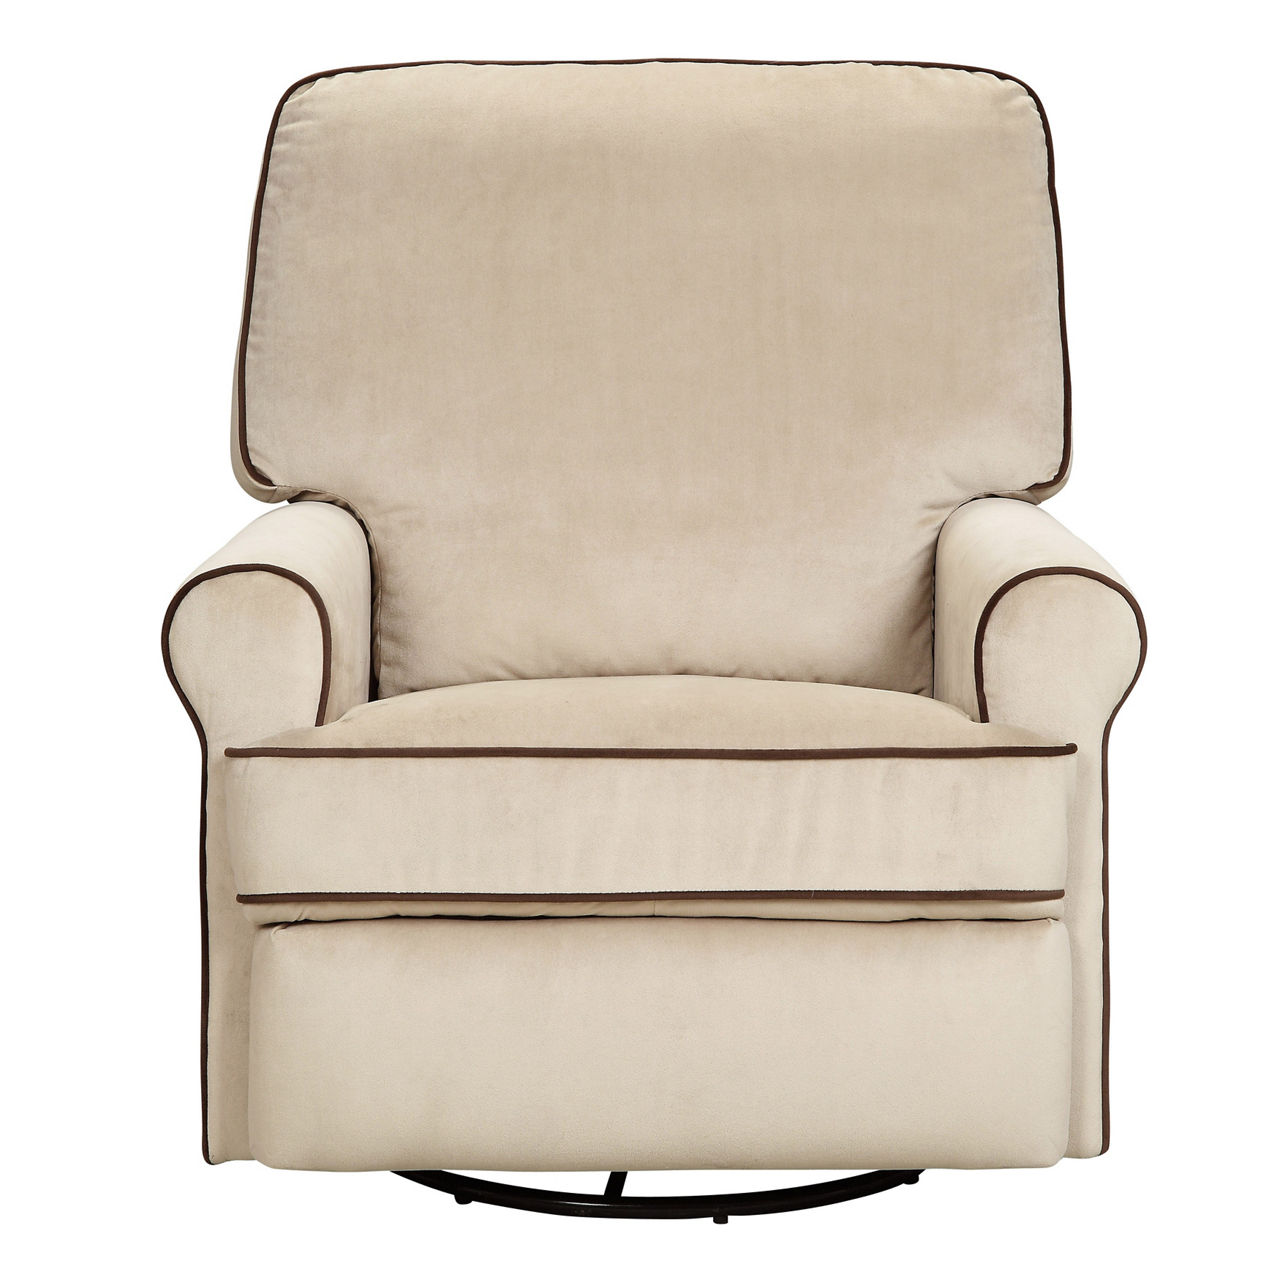 TAN SWIVEL GLIDER CHAIR WITH BROWN PIPING